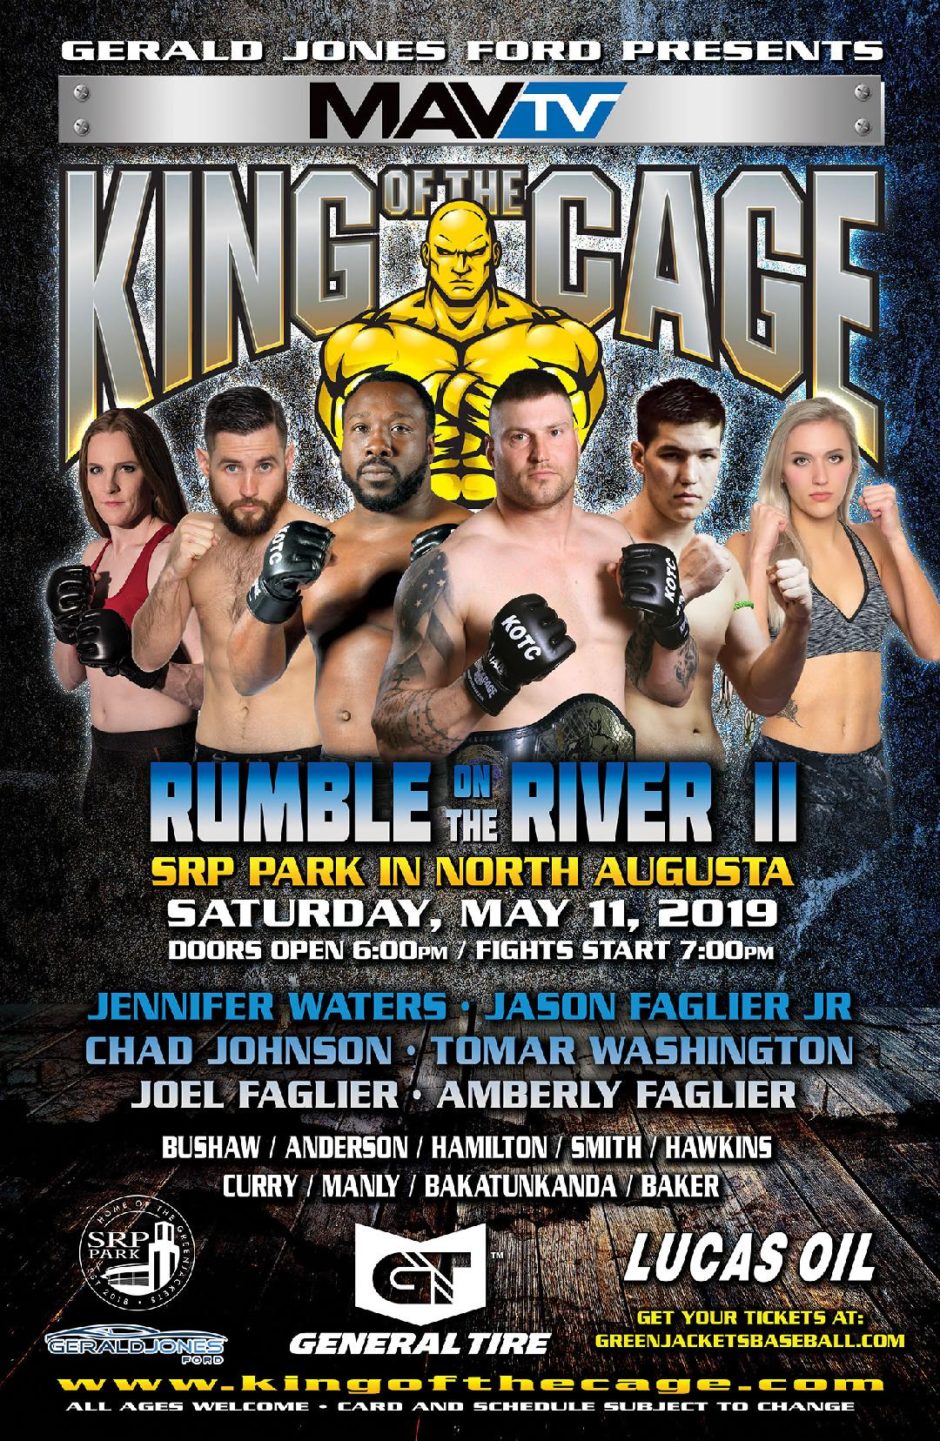 King of the Cage Debuts at SRP Park on May 11 for “RUMBLE ON THE RIVER